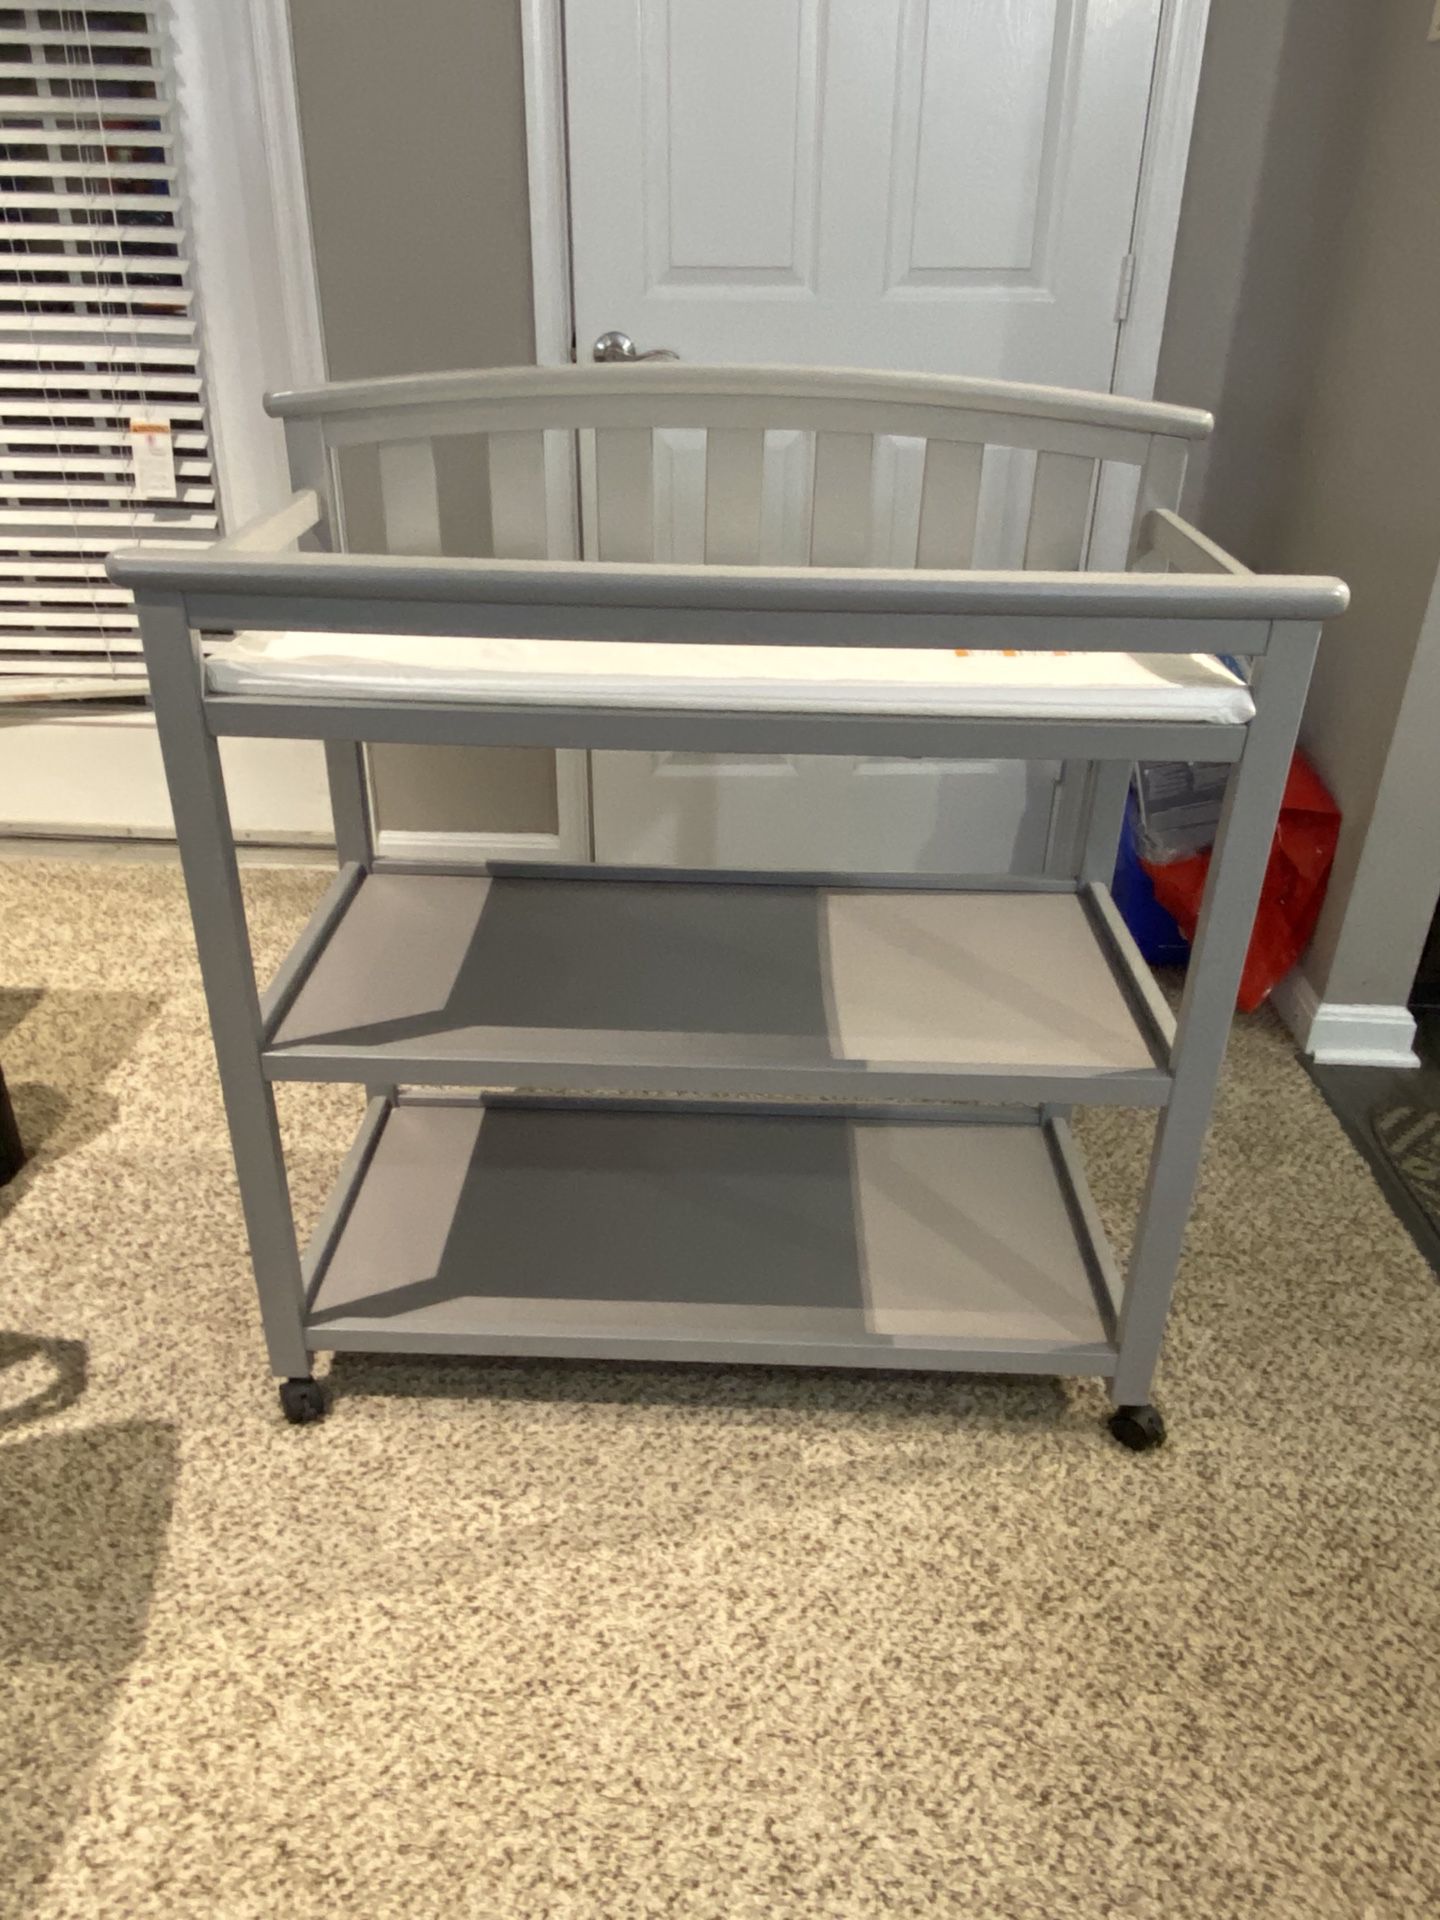 Delta Diaper Changing Table